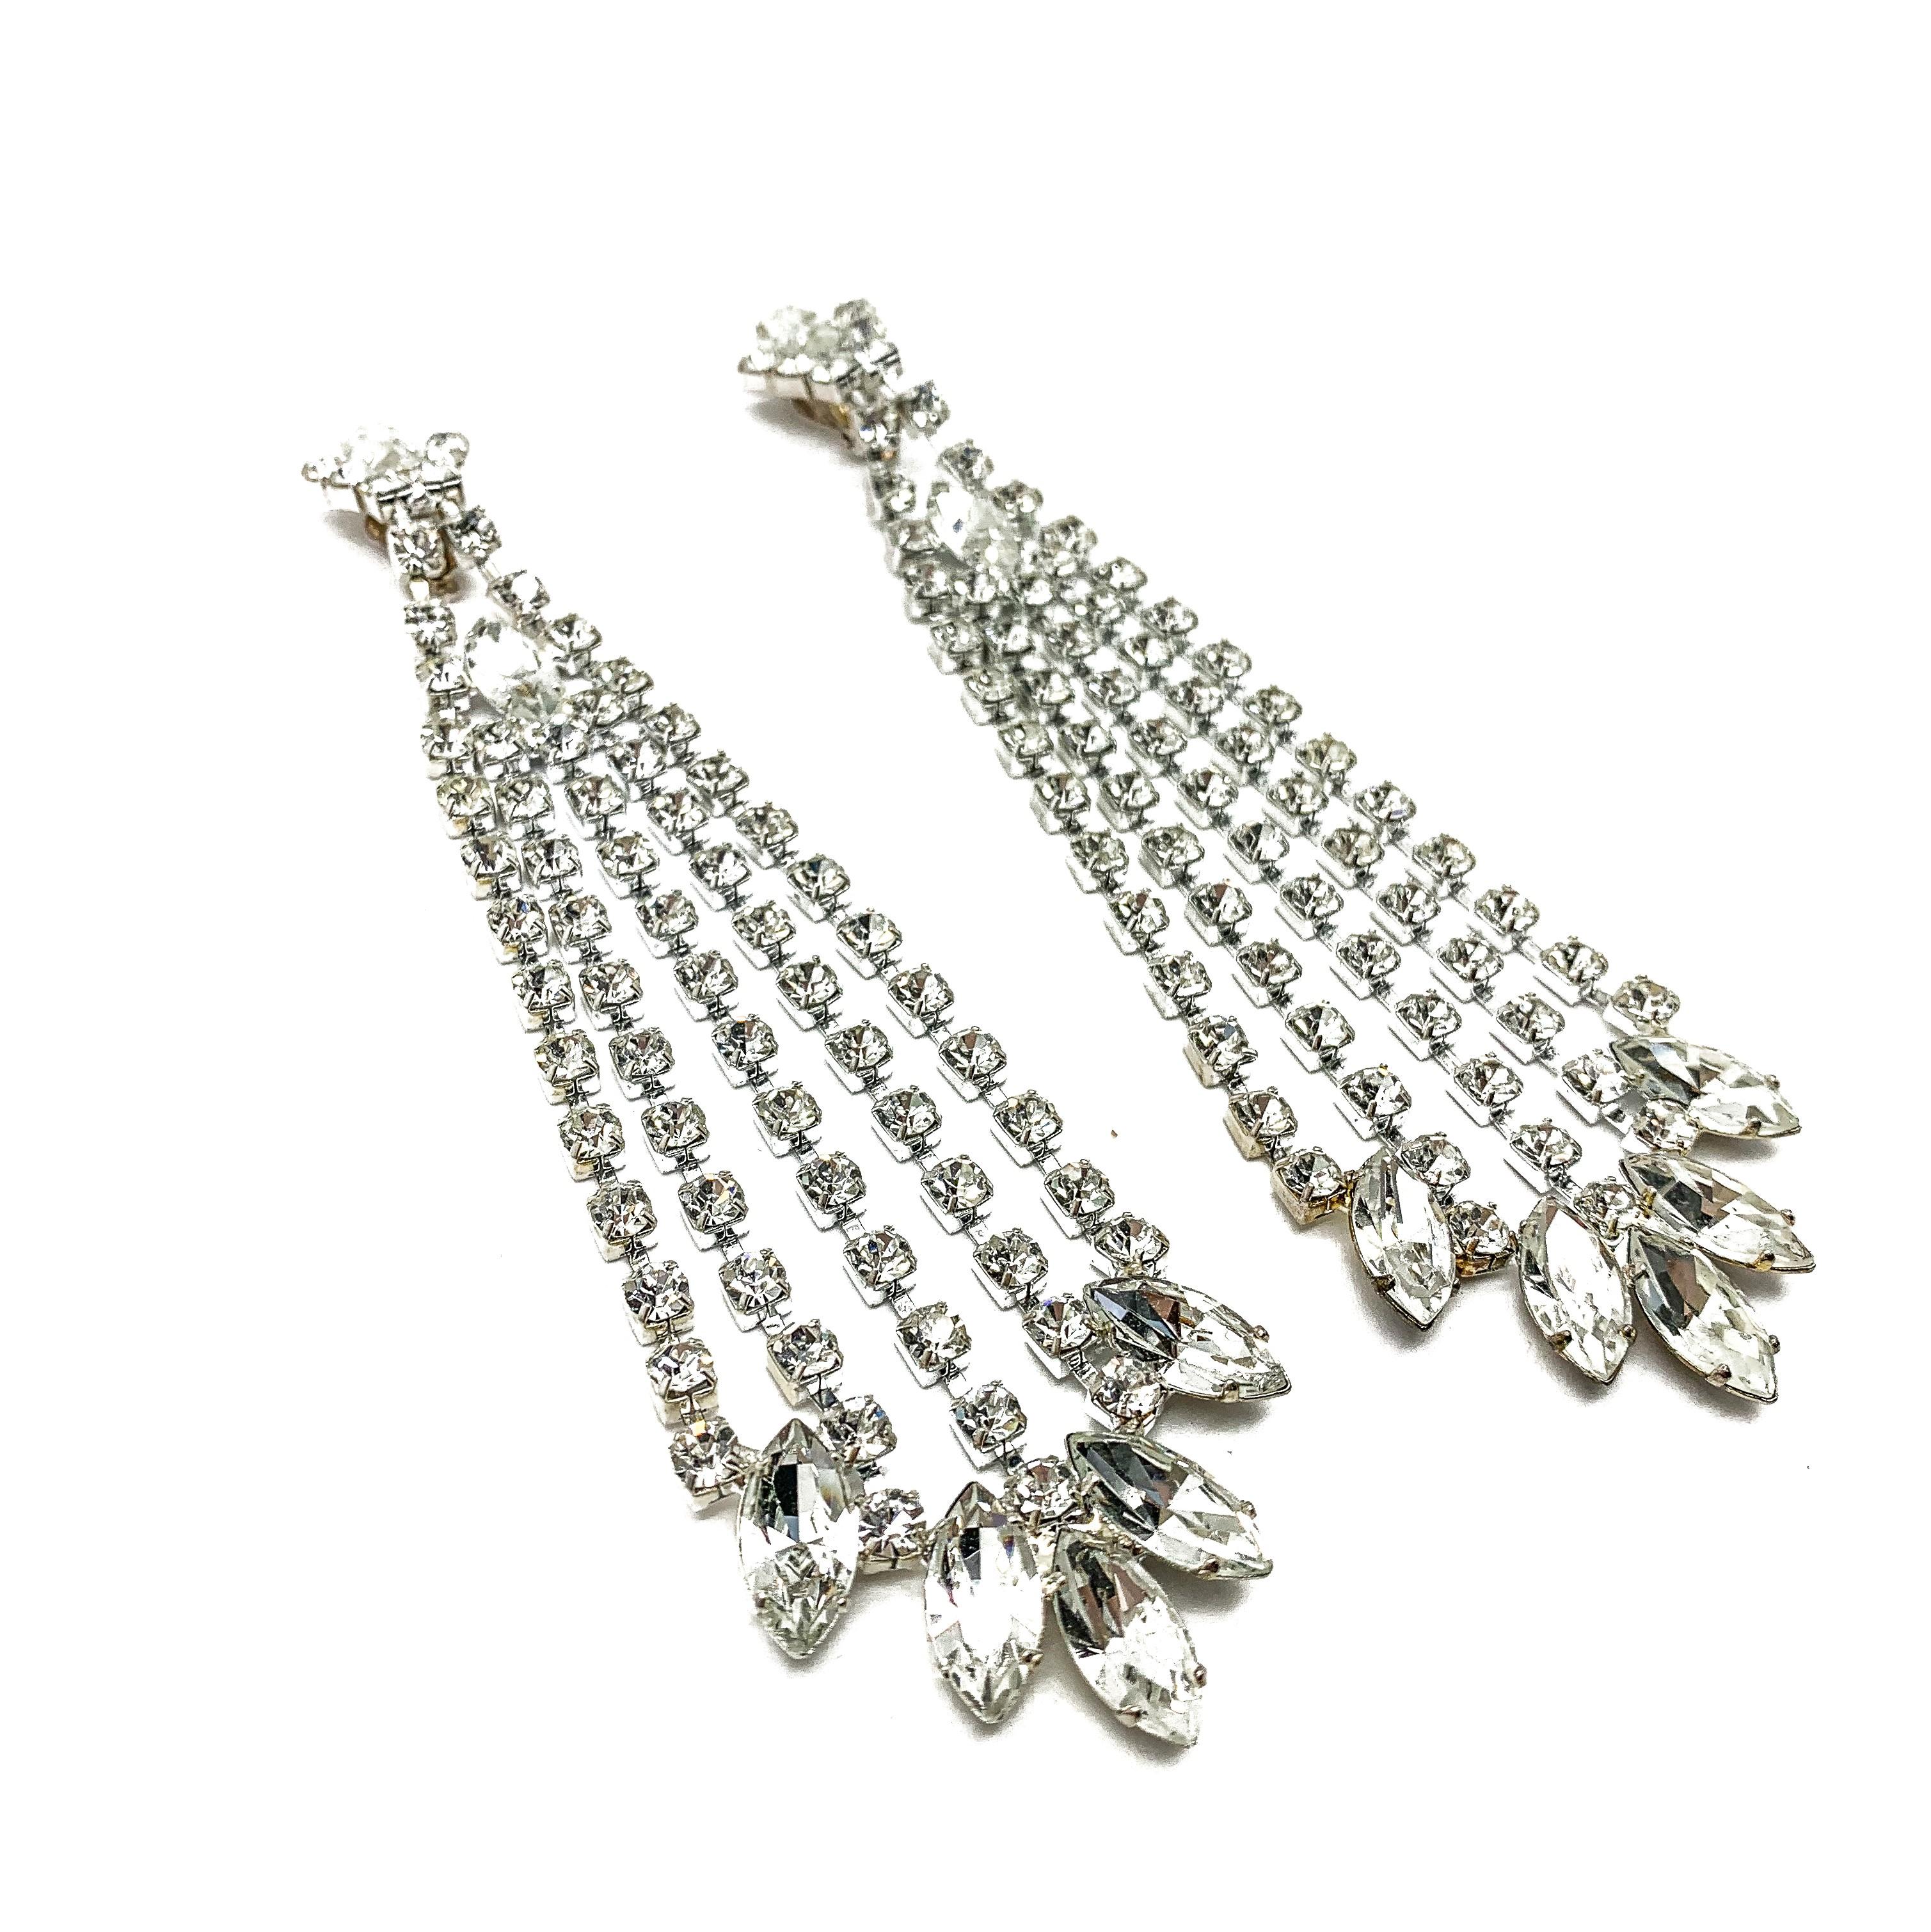 A spectacular pair of Vintage Crystal Chandelier Earrings. Crafted in silver-tone metal and crystals. These incredibly proportioned earrings take no prisoners. The neat clip on top dropping away dramatically to a five rows of crystals culminating in